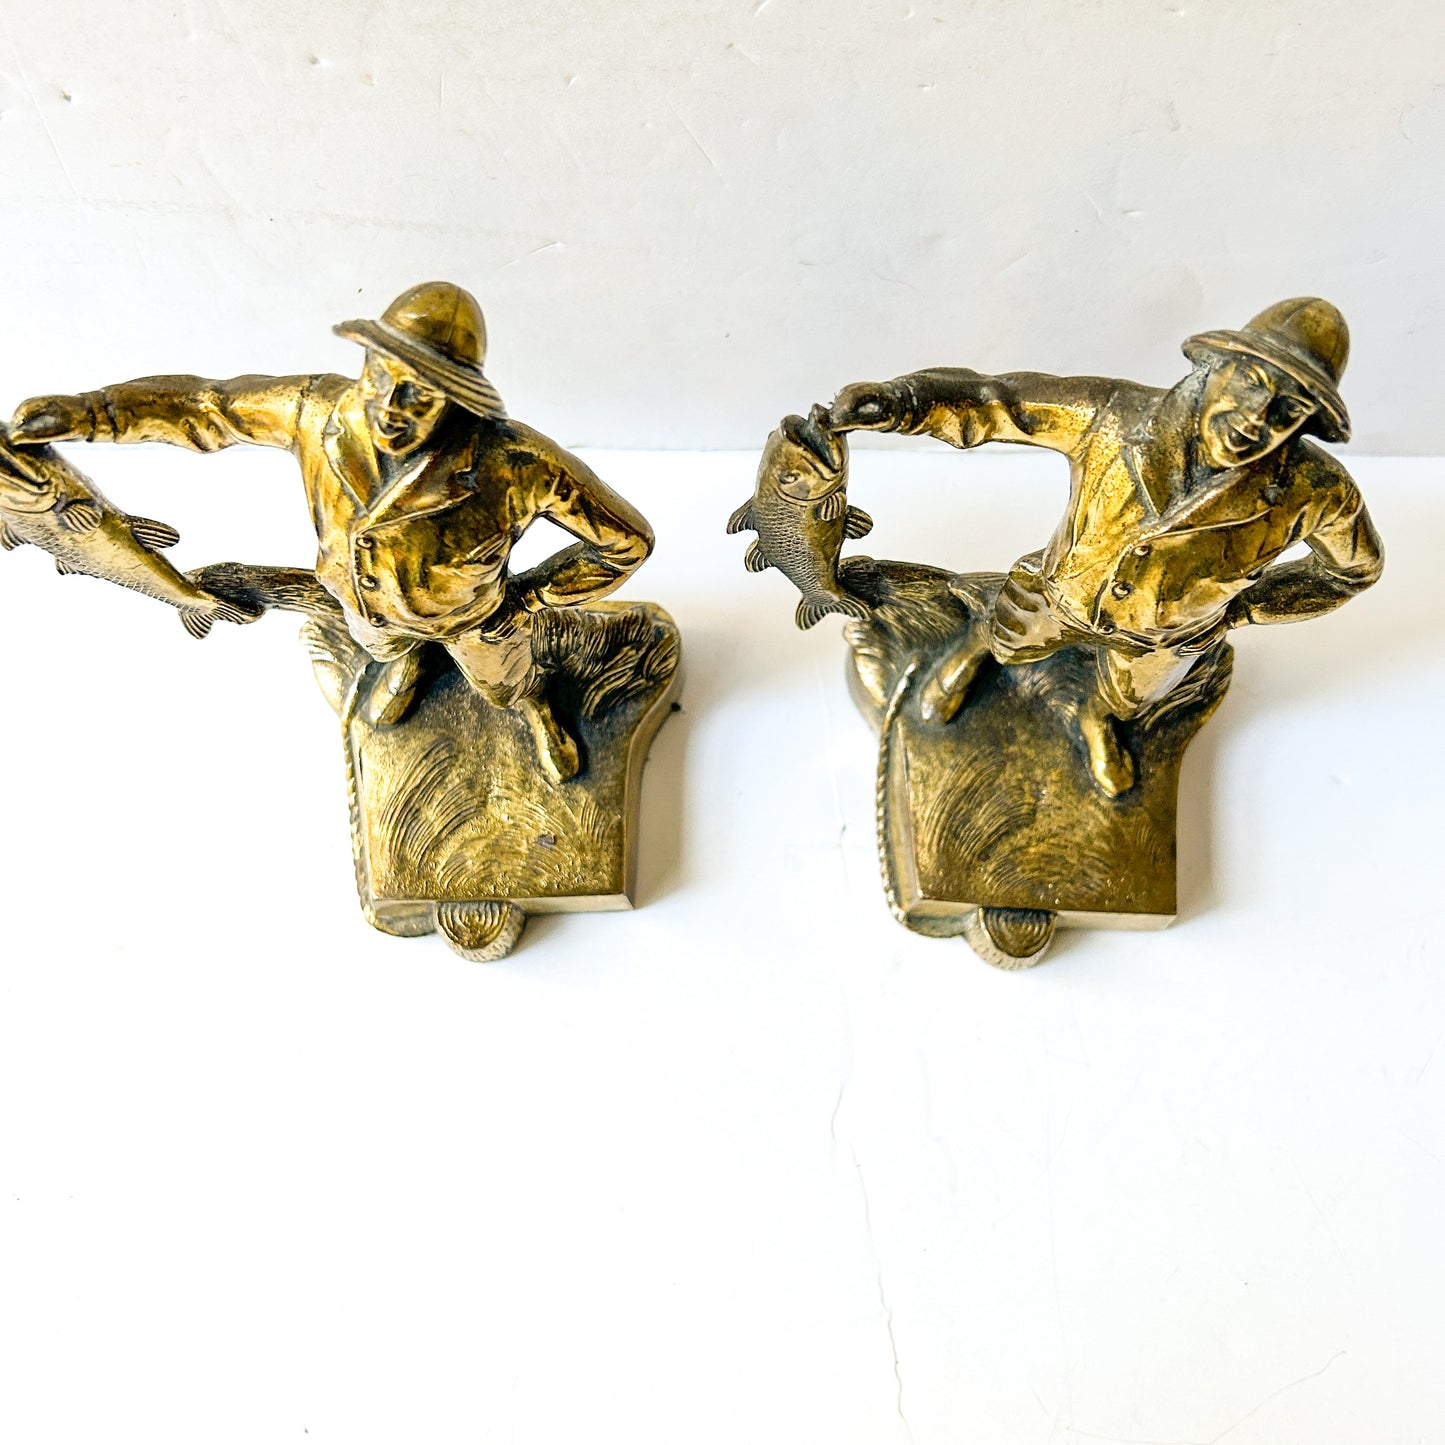 Vintage Jennings Brothers Fisherman Bookends, brass library decor